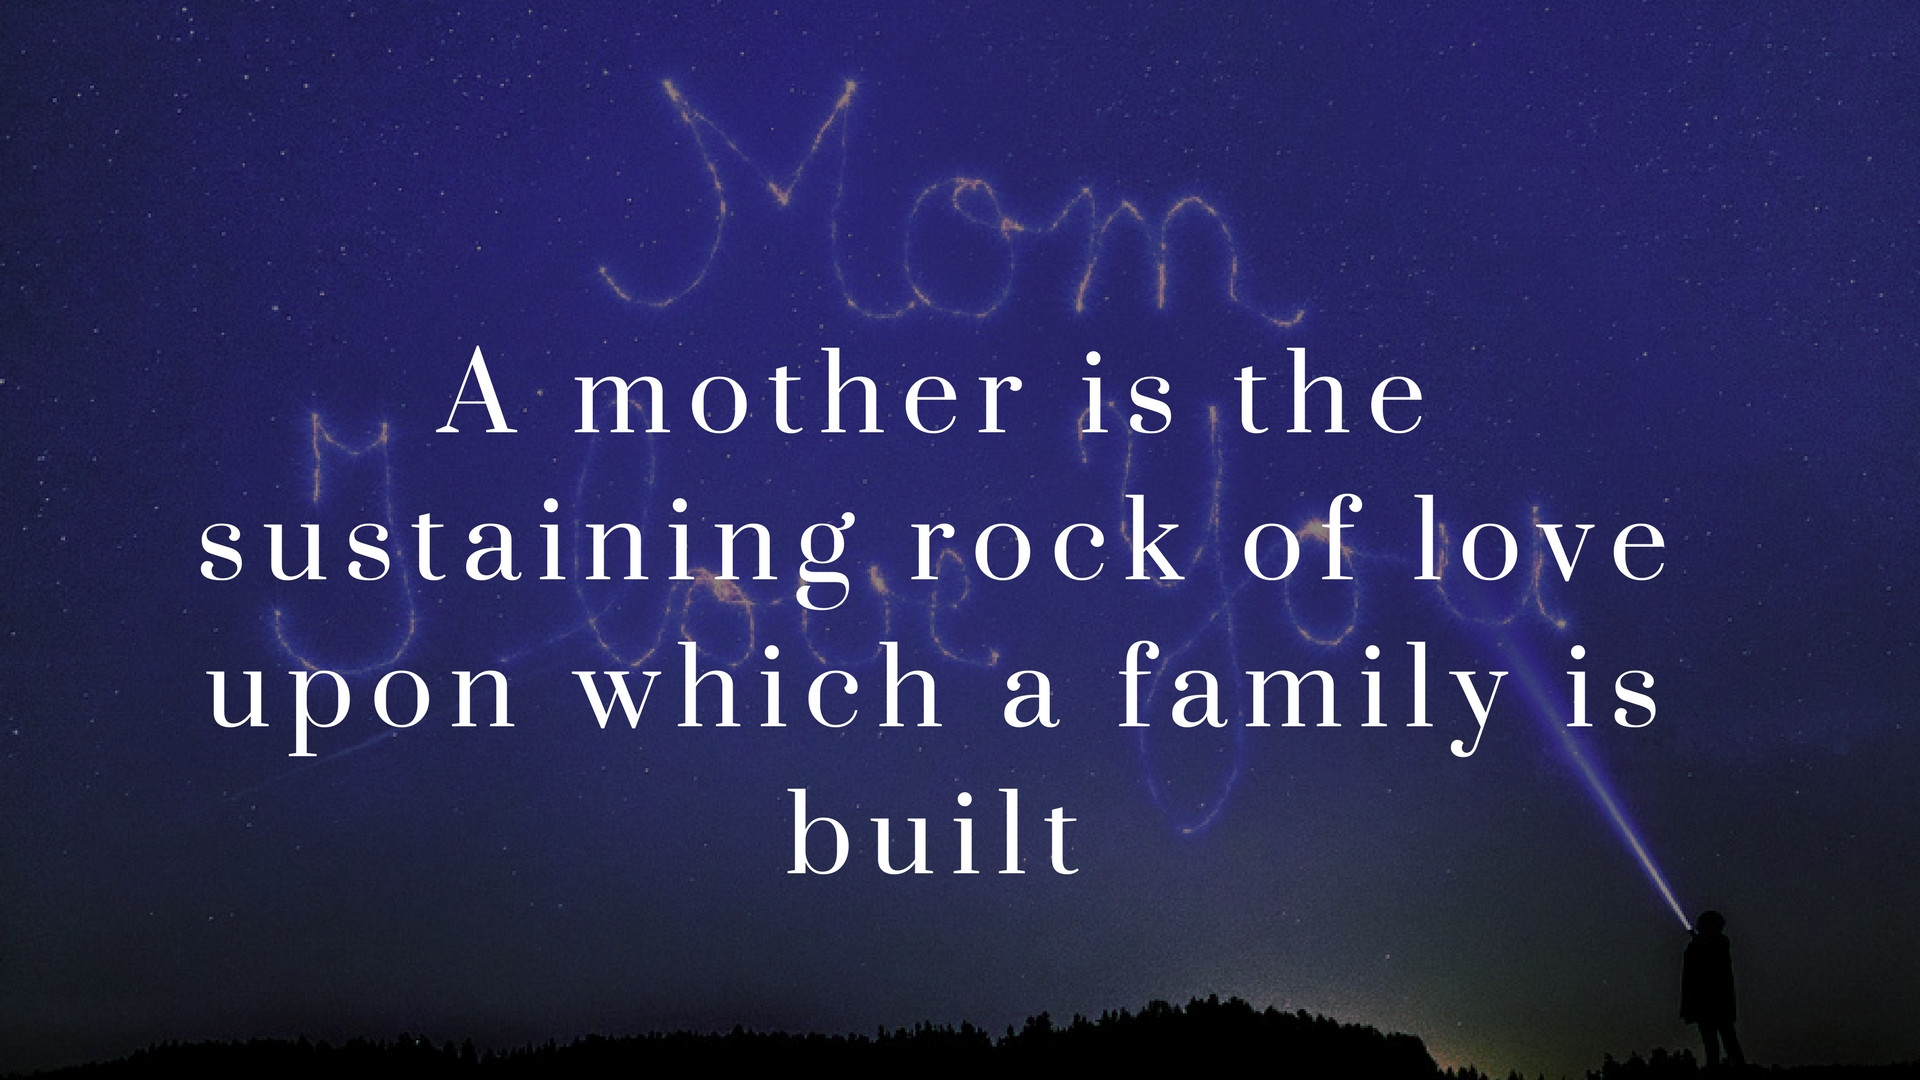 Quotes On Mothers Love
 2019 Happy Mother s Day Wishes Quotes Messages to Send